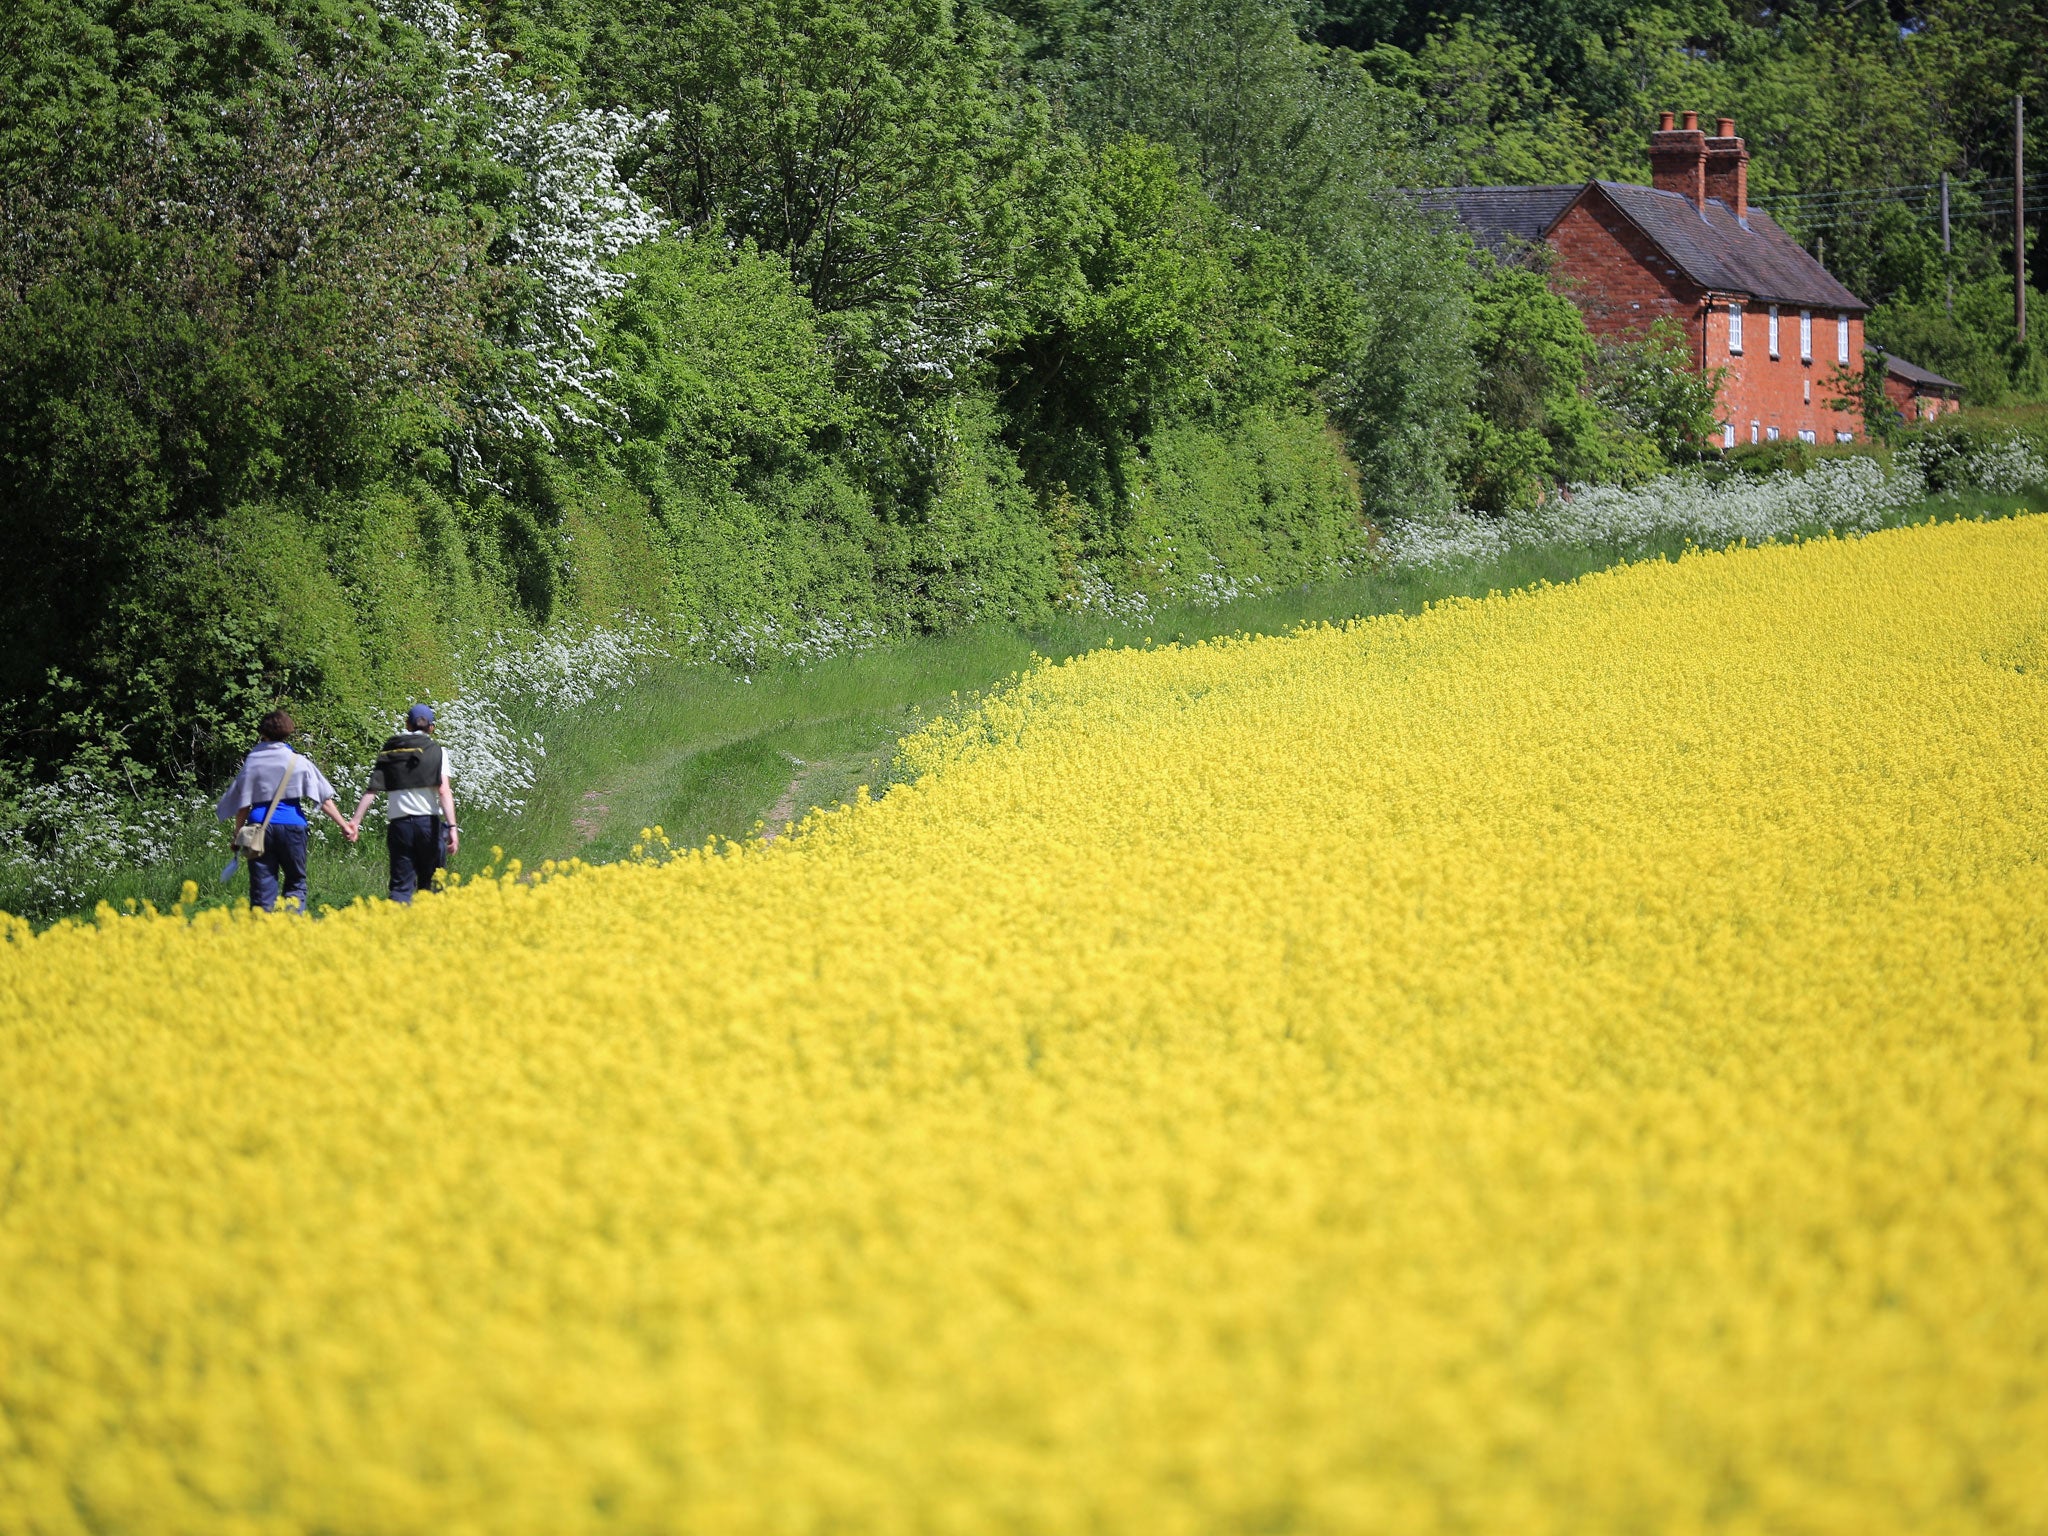 Rapeseed blooms in the sunshine, in a field close to the village of Brewood in Stafford